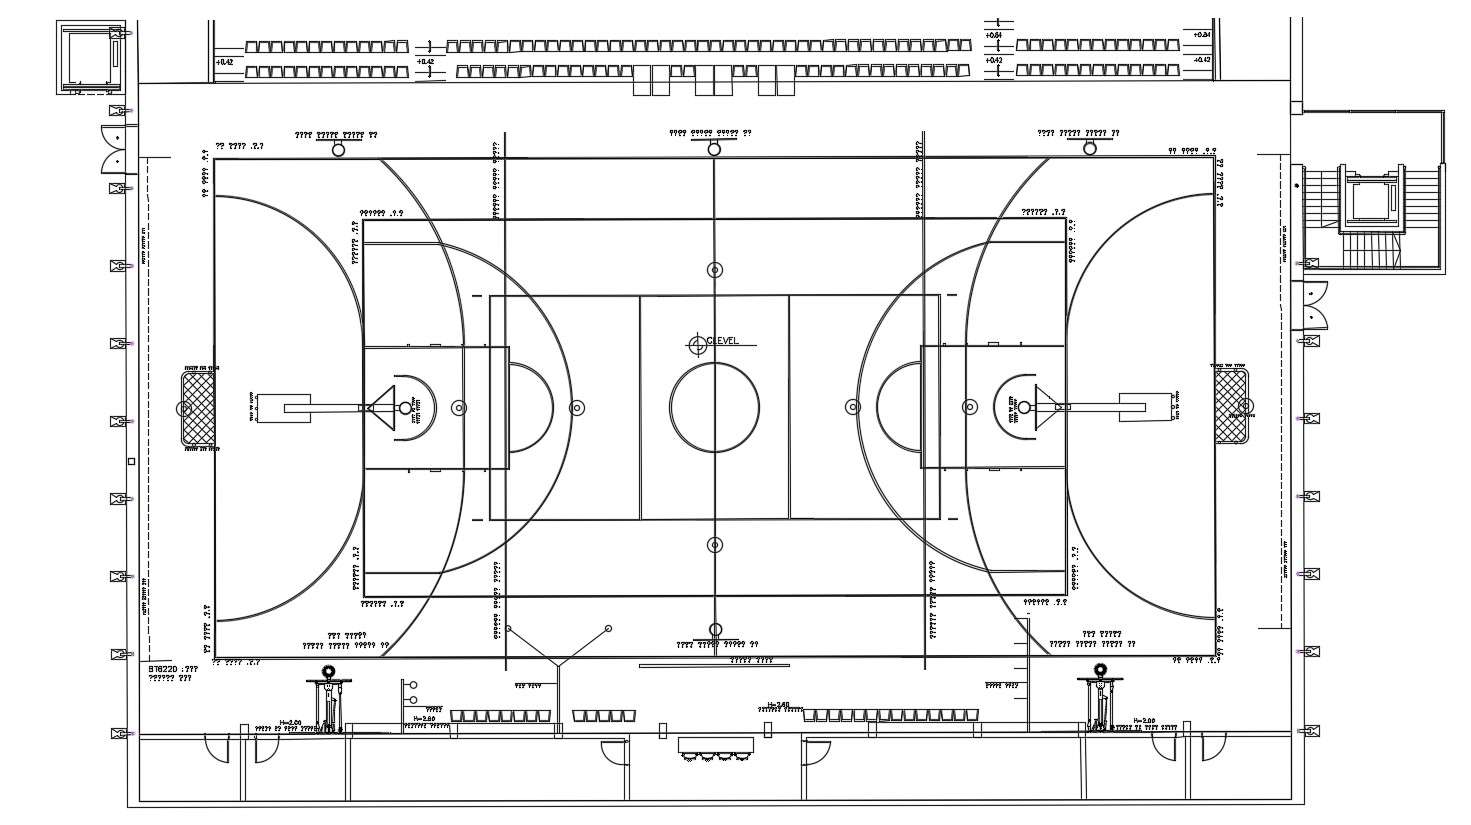 home basketball court layout